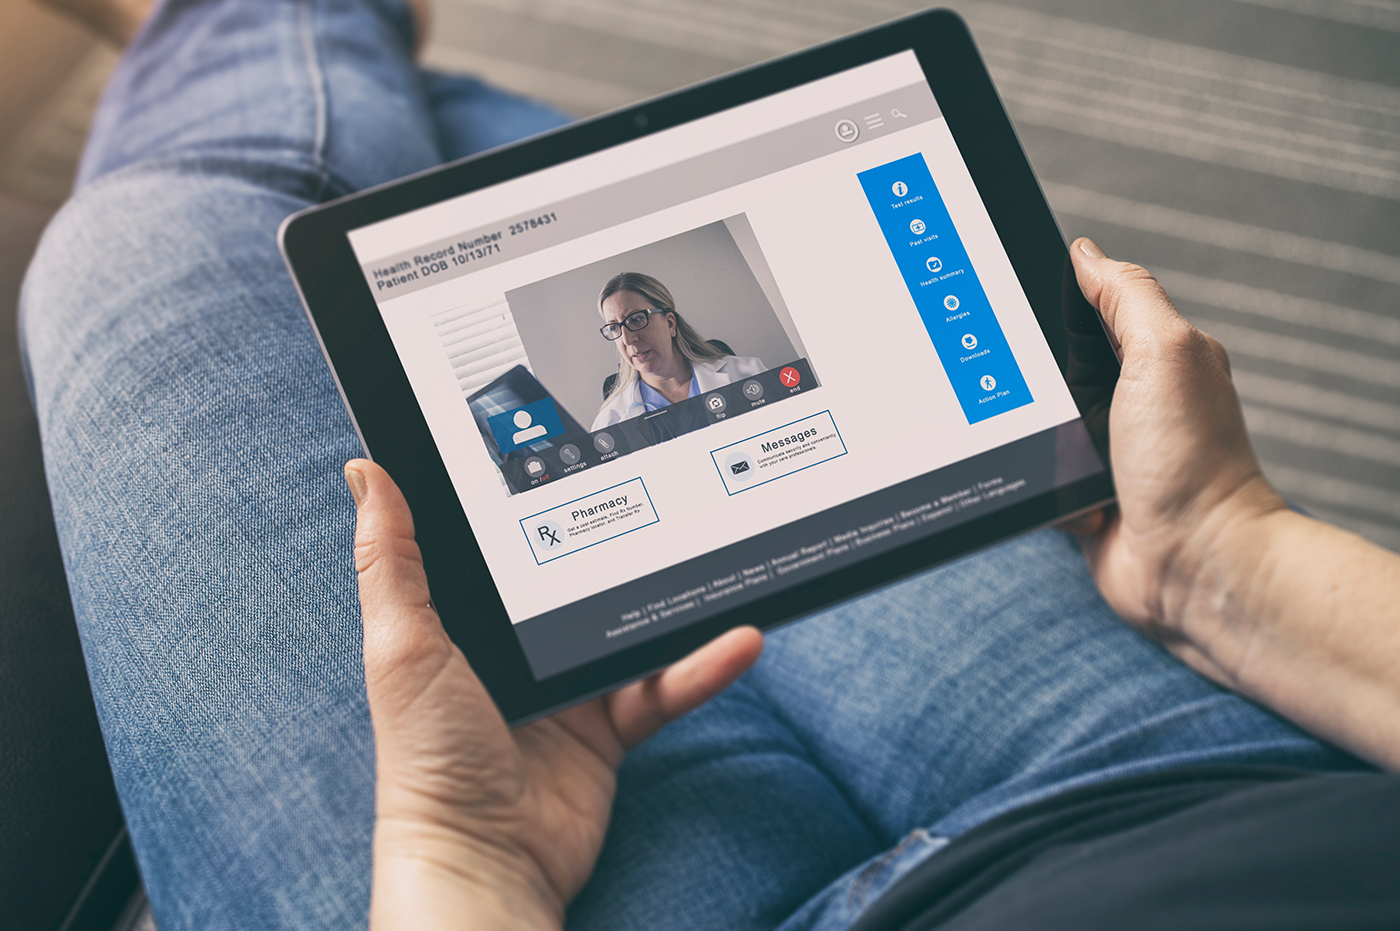 A doctor's visit via zoom call on a tablet device 